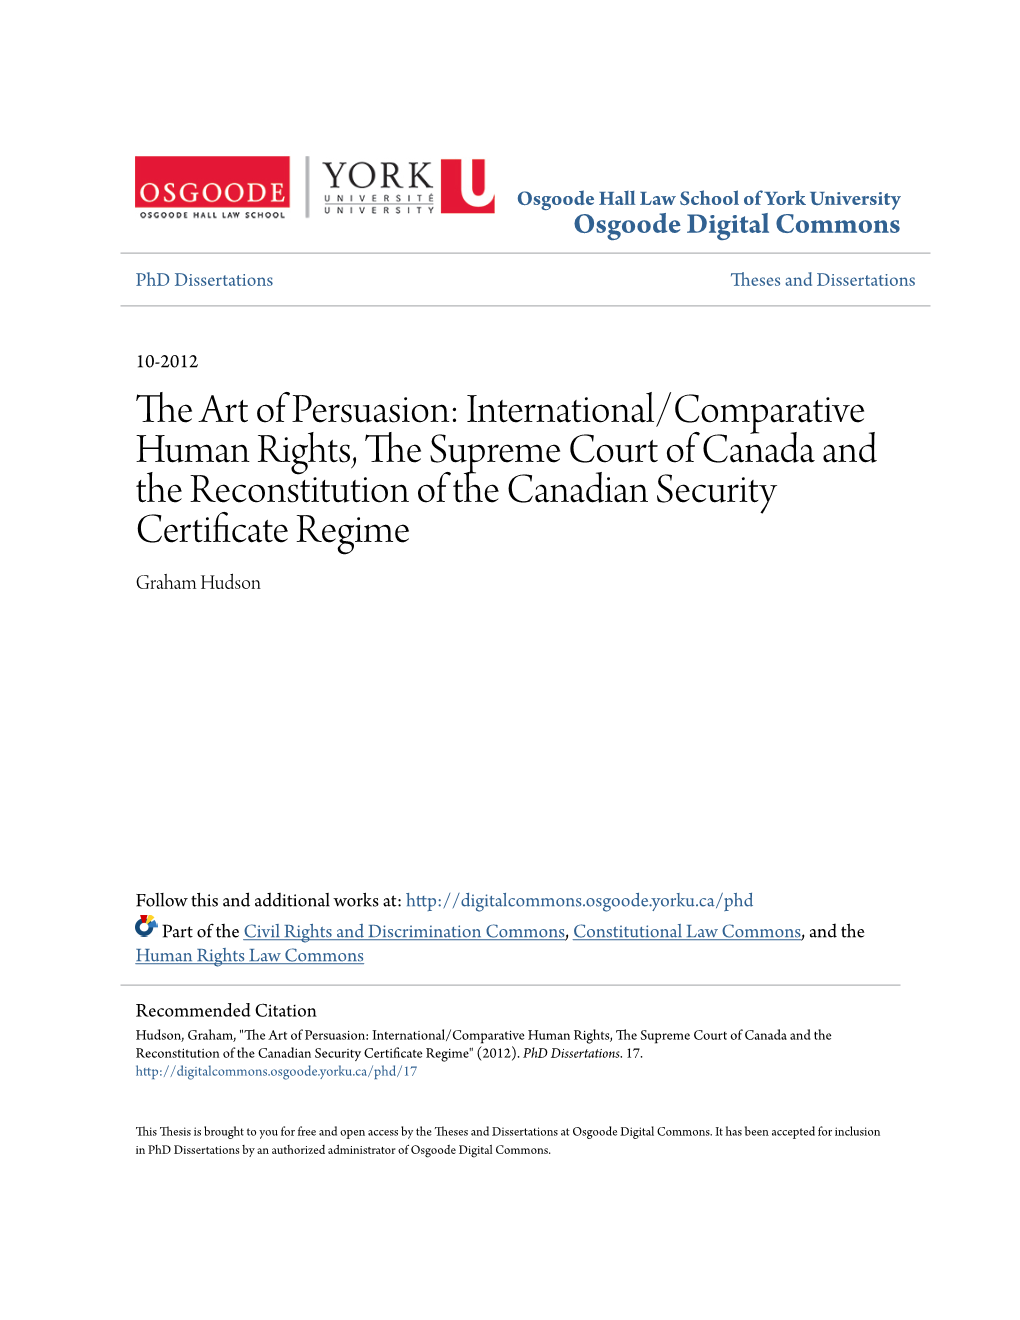 International/Comparative Human Rights, the Supreme Court of Canada and the Reconstitution of the Canadian Security Certificate Regime